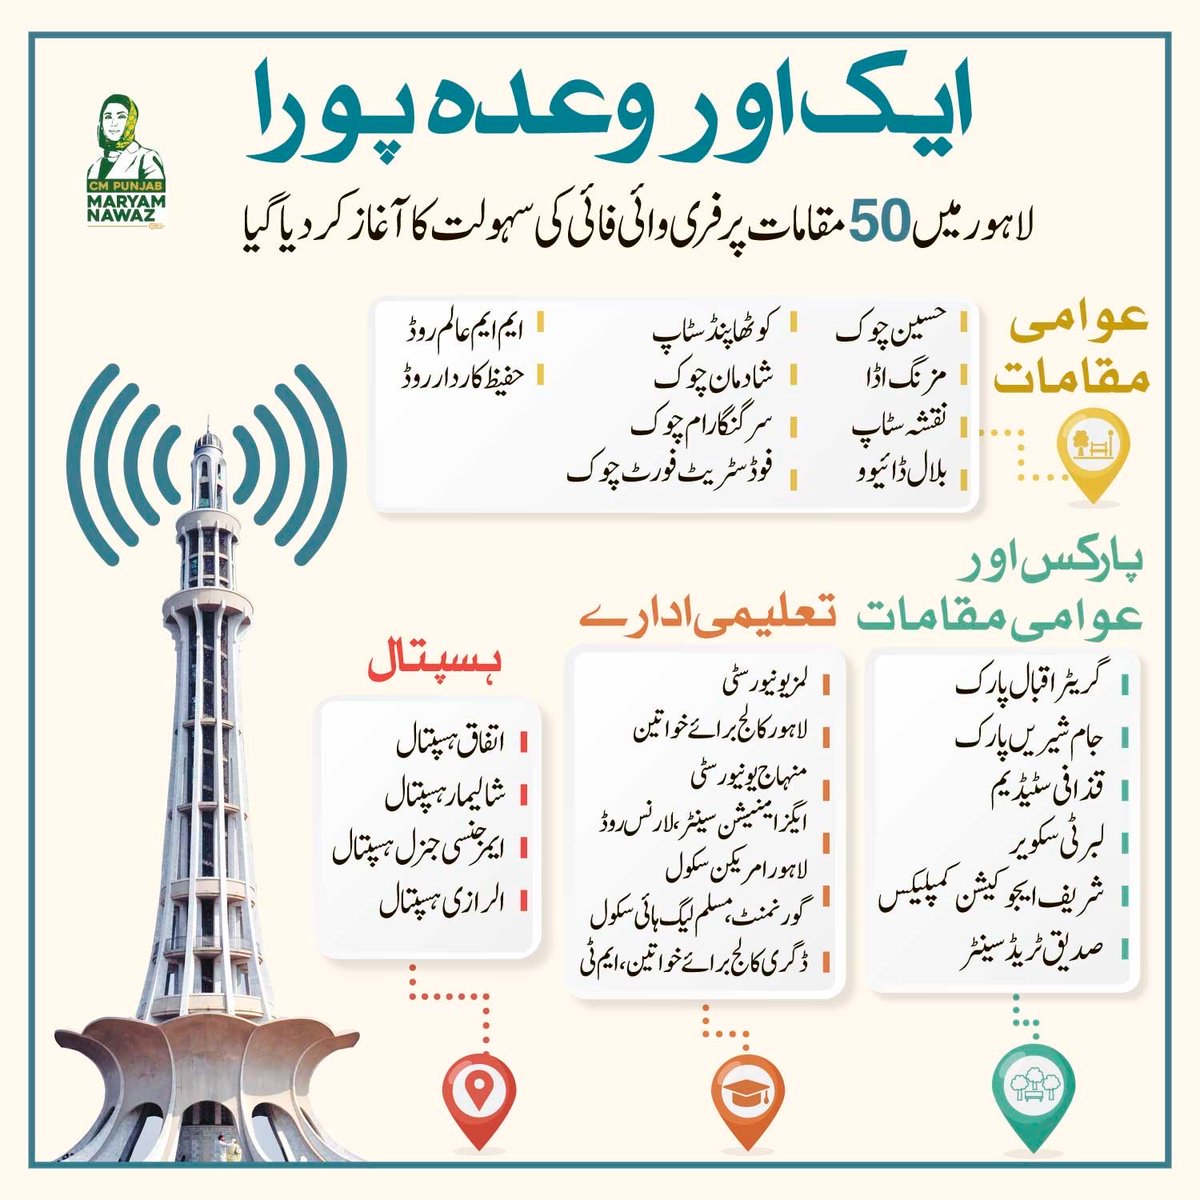 Free WiFi started at the following (50 spots) in Lahore. Rest of Lahore is being done too. Alhamdolillah! We promise, we deliver.